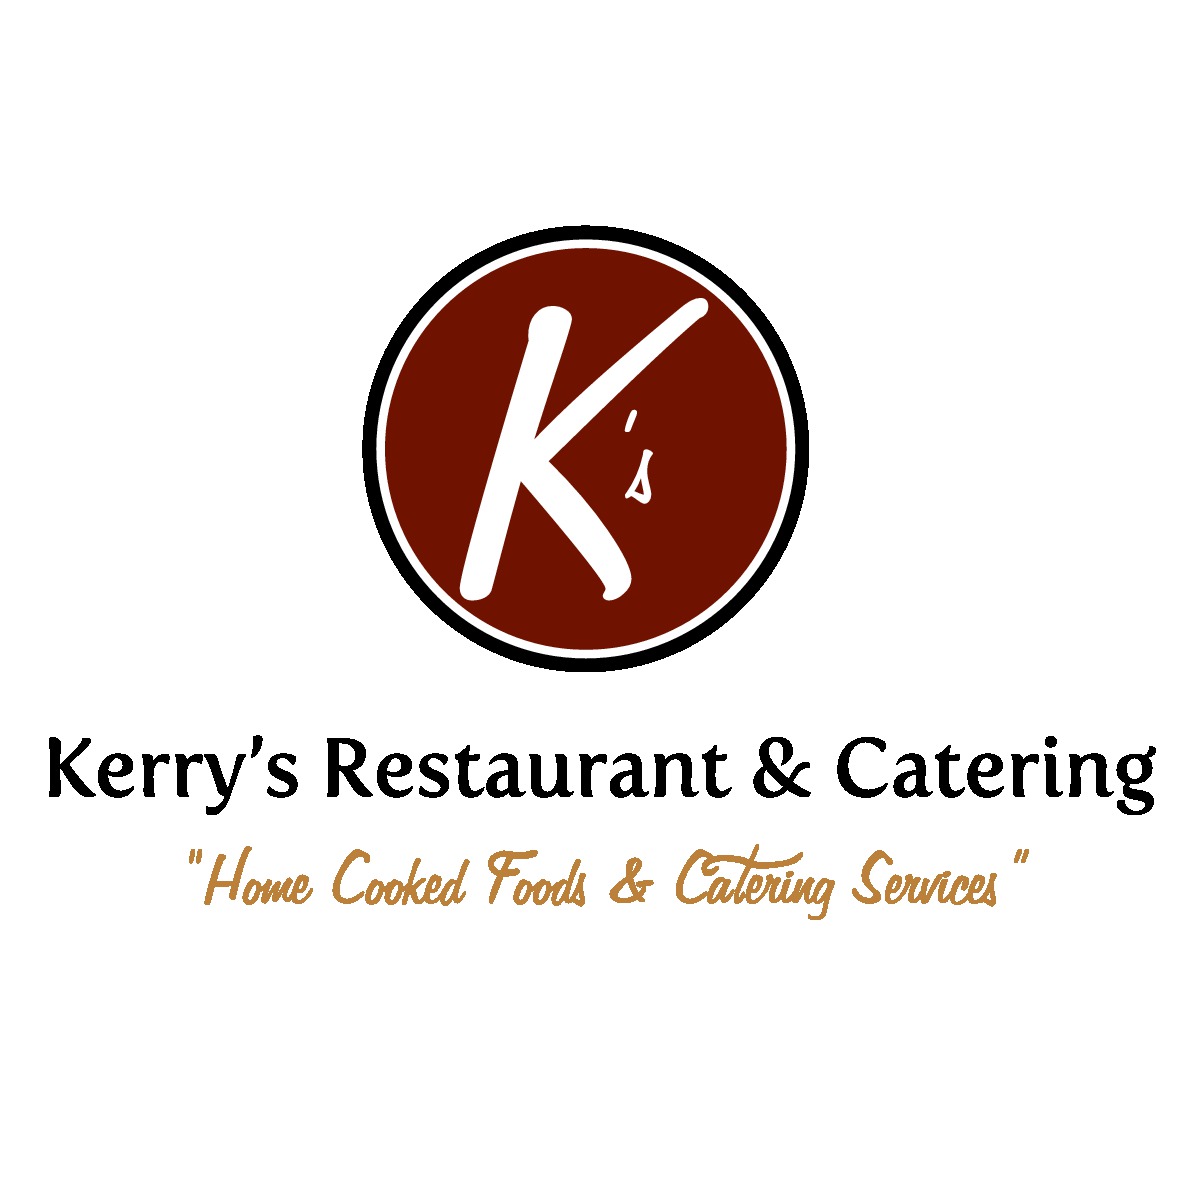 Kerry's Restaurant & Catering, Inc's Image